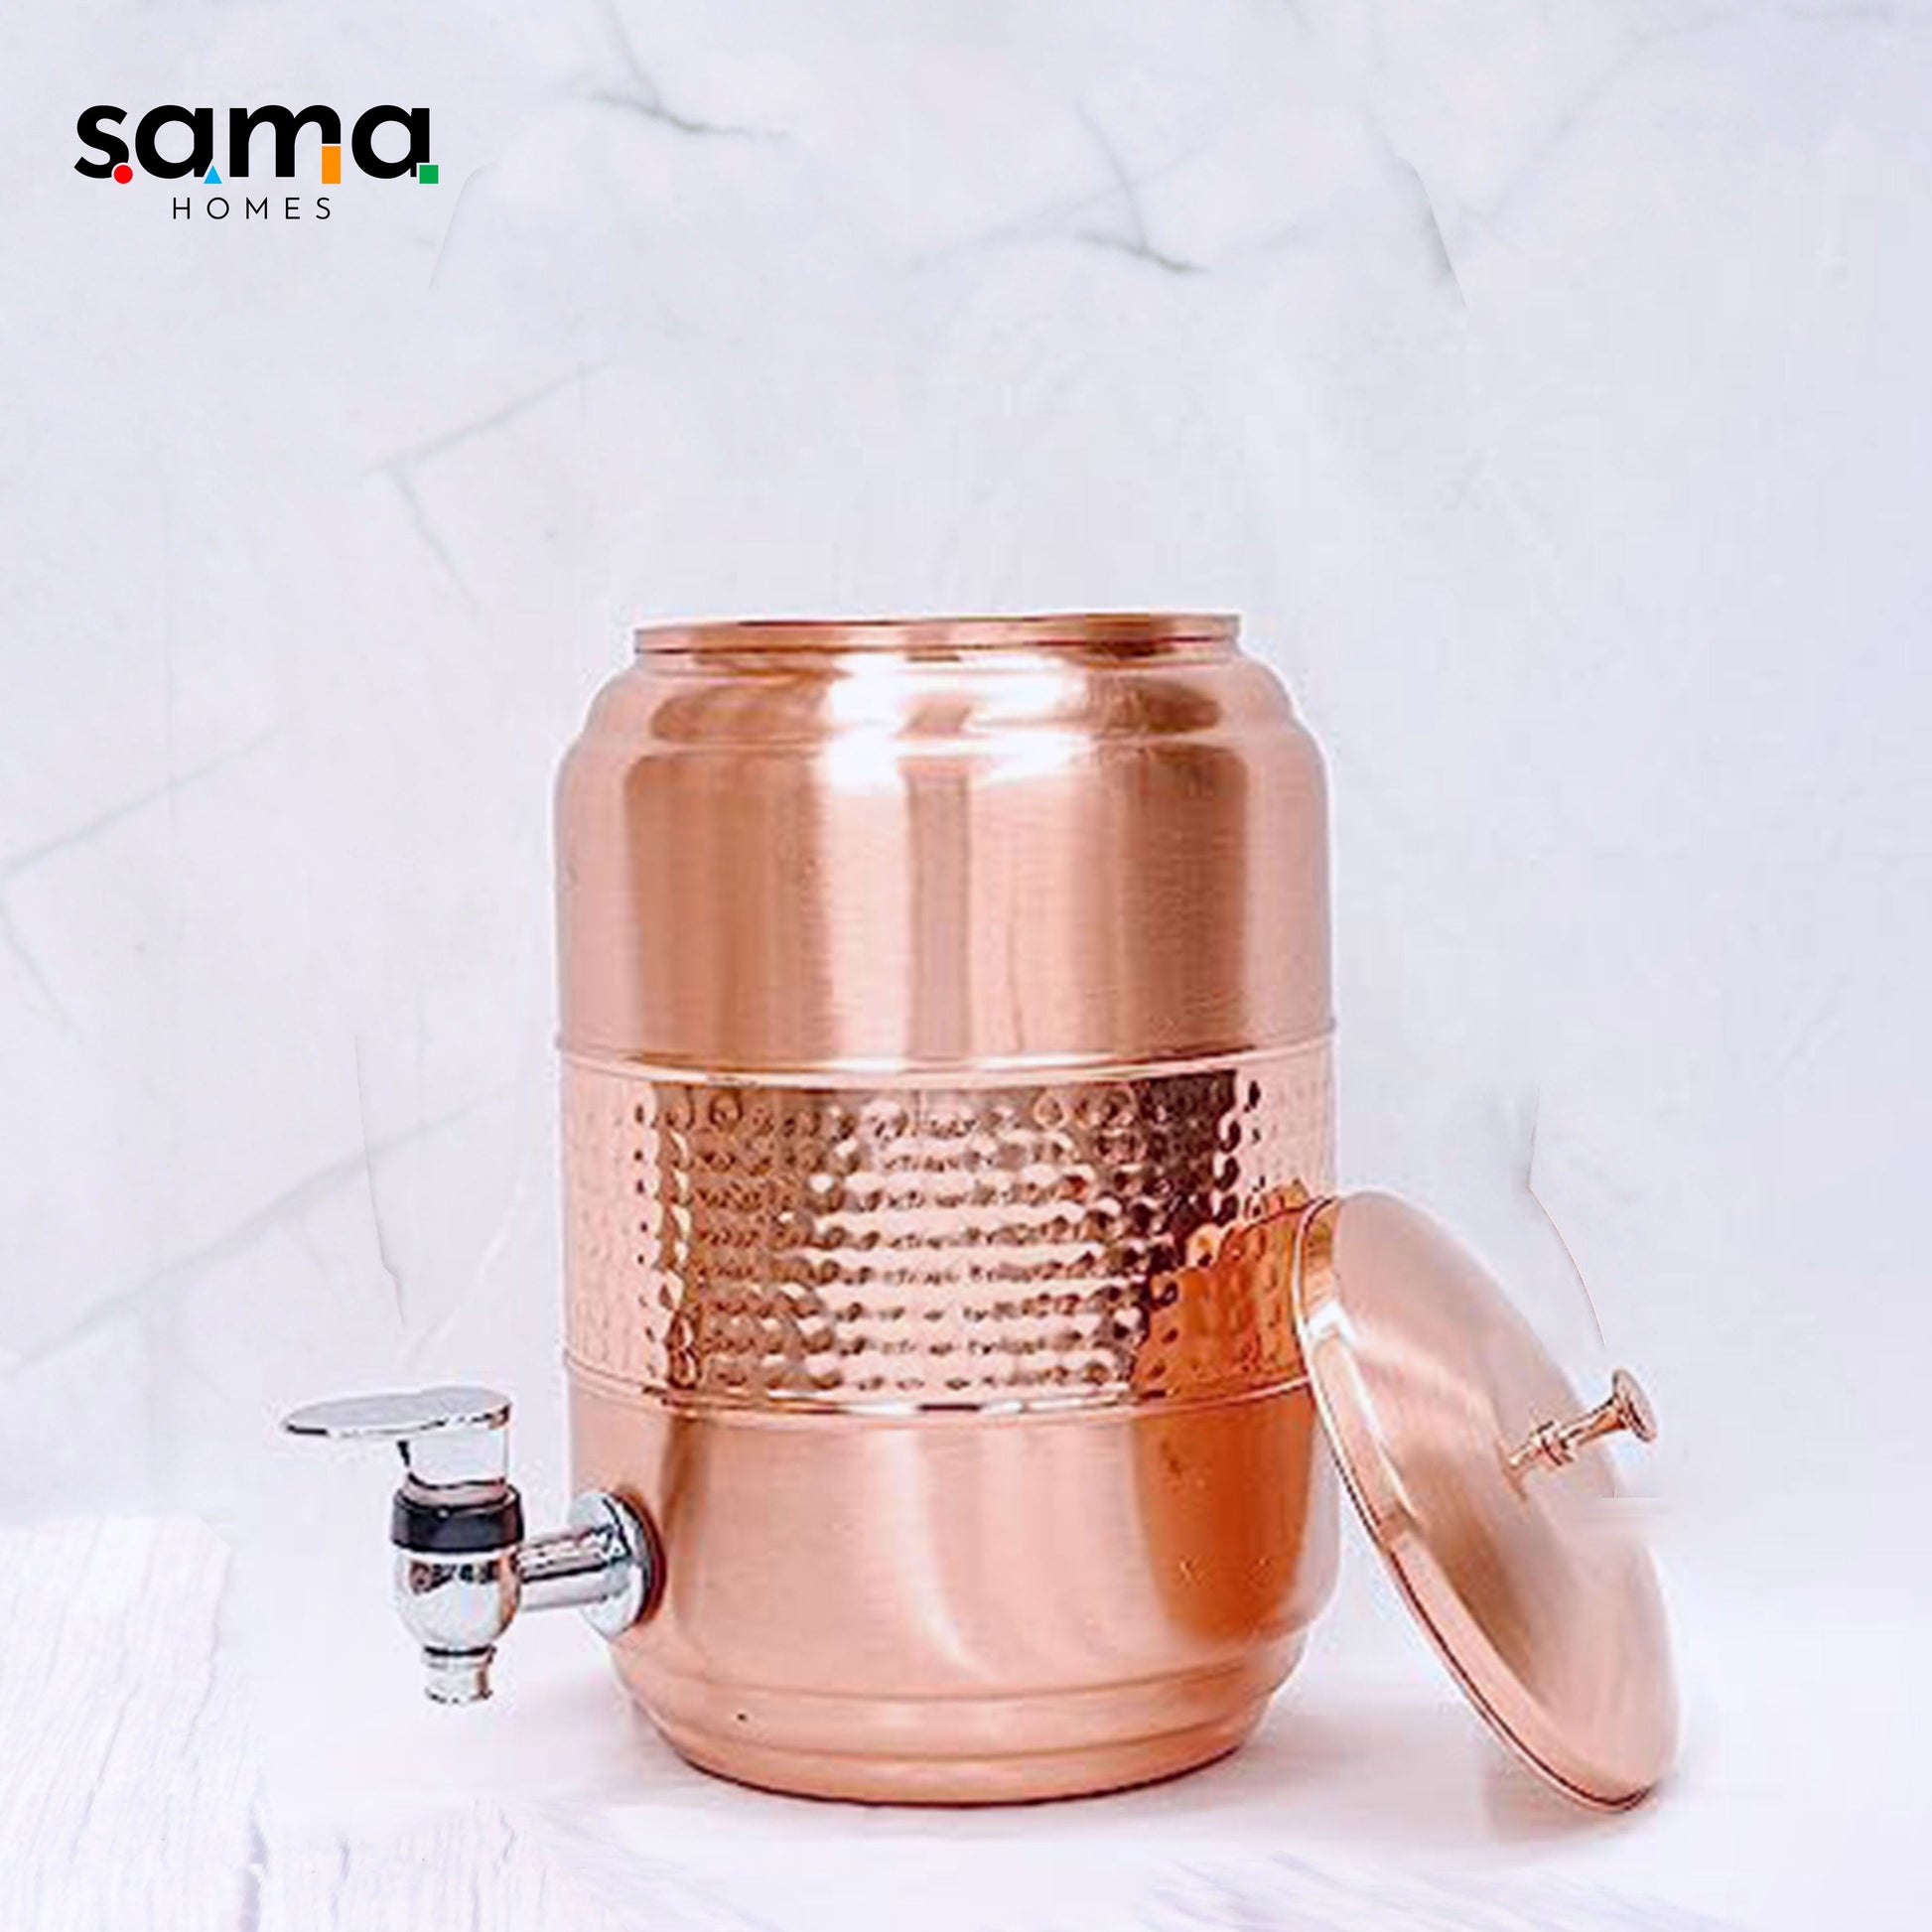 SAMA Homes - hammered copper water dispenser matka pot container pot with pure copper and ayurvedic health benefits 5000 ml